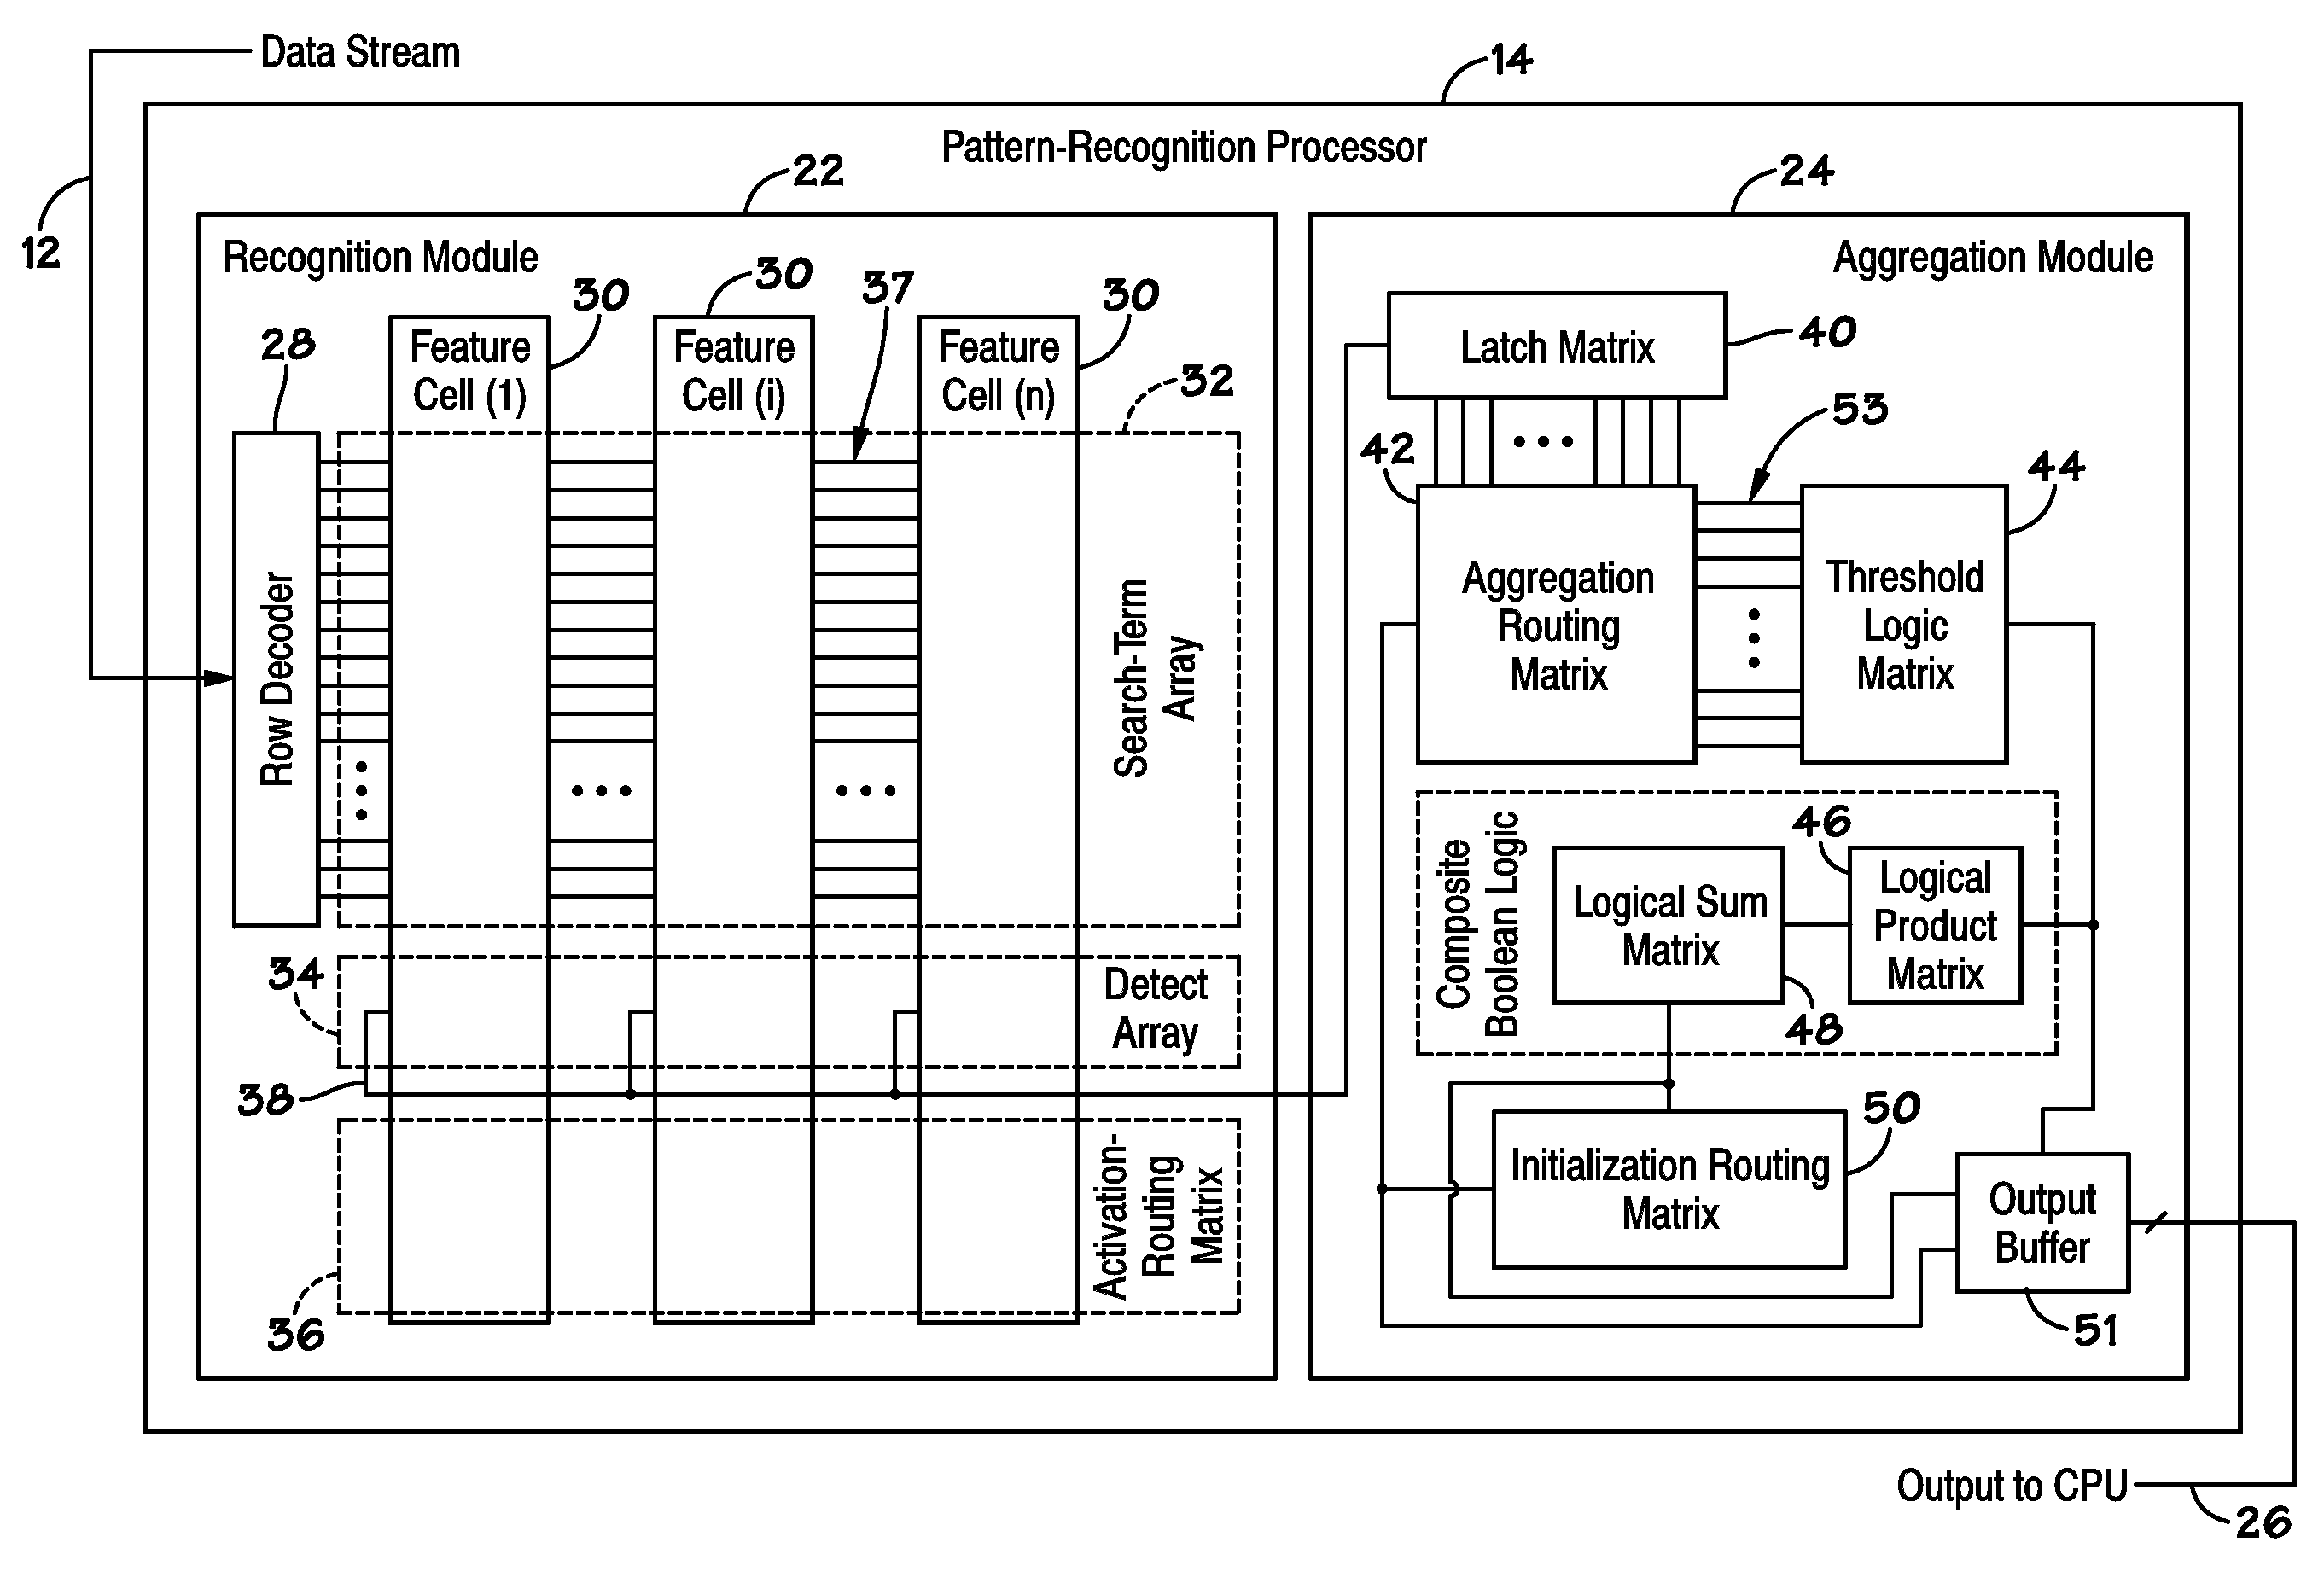 Method and Systems for Power Consumption Management of a Pattern-Recognition Processor